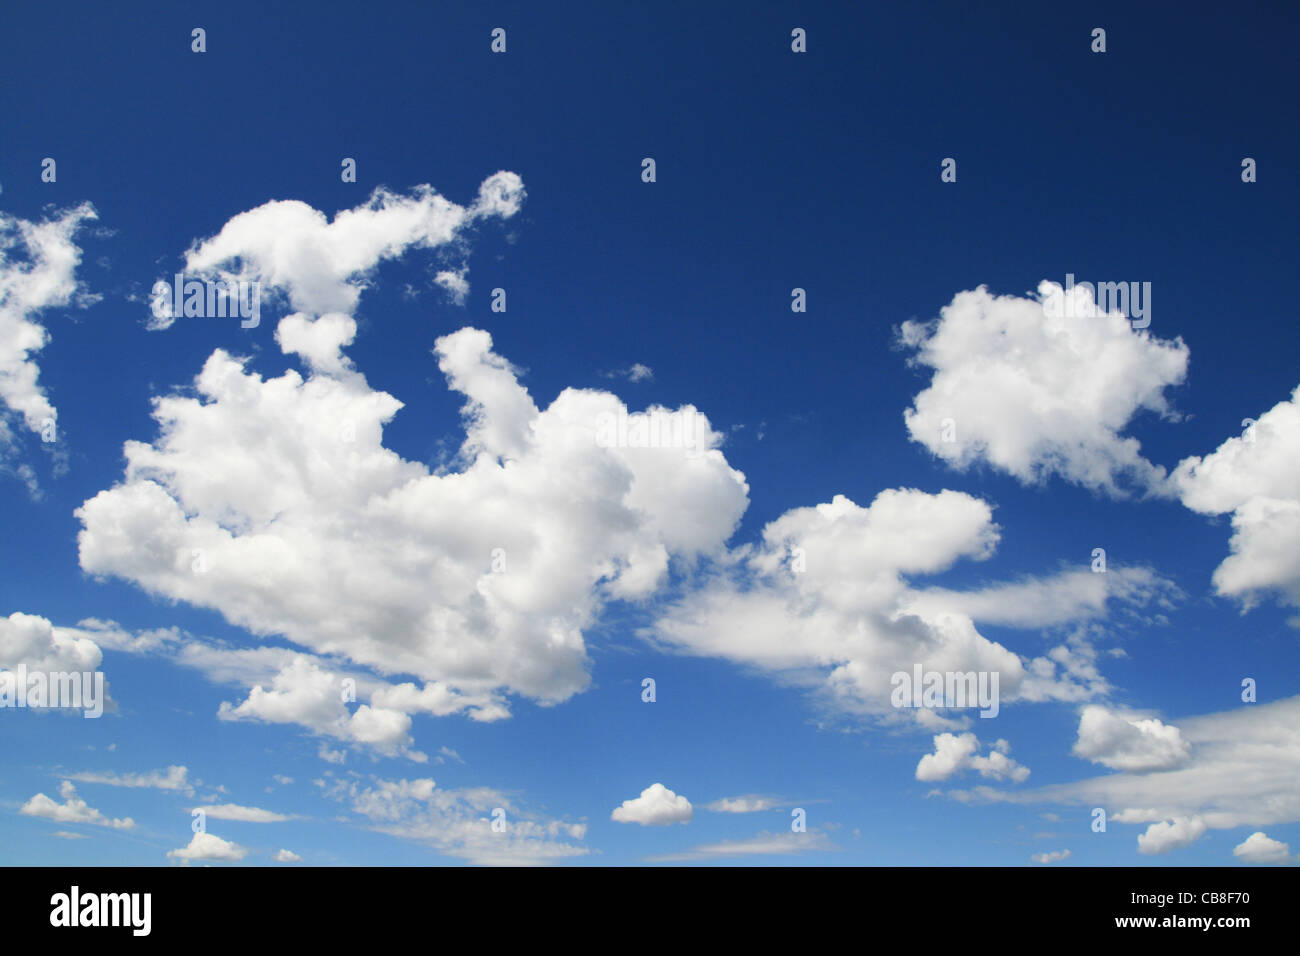 horizontal image of blue sky with puffy white clouds Stock Photo